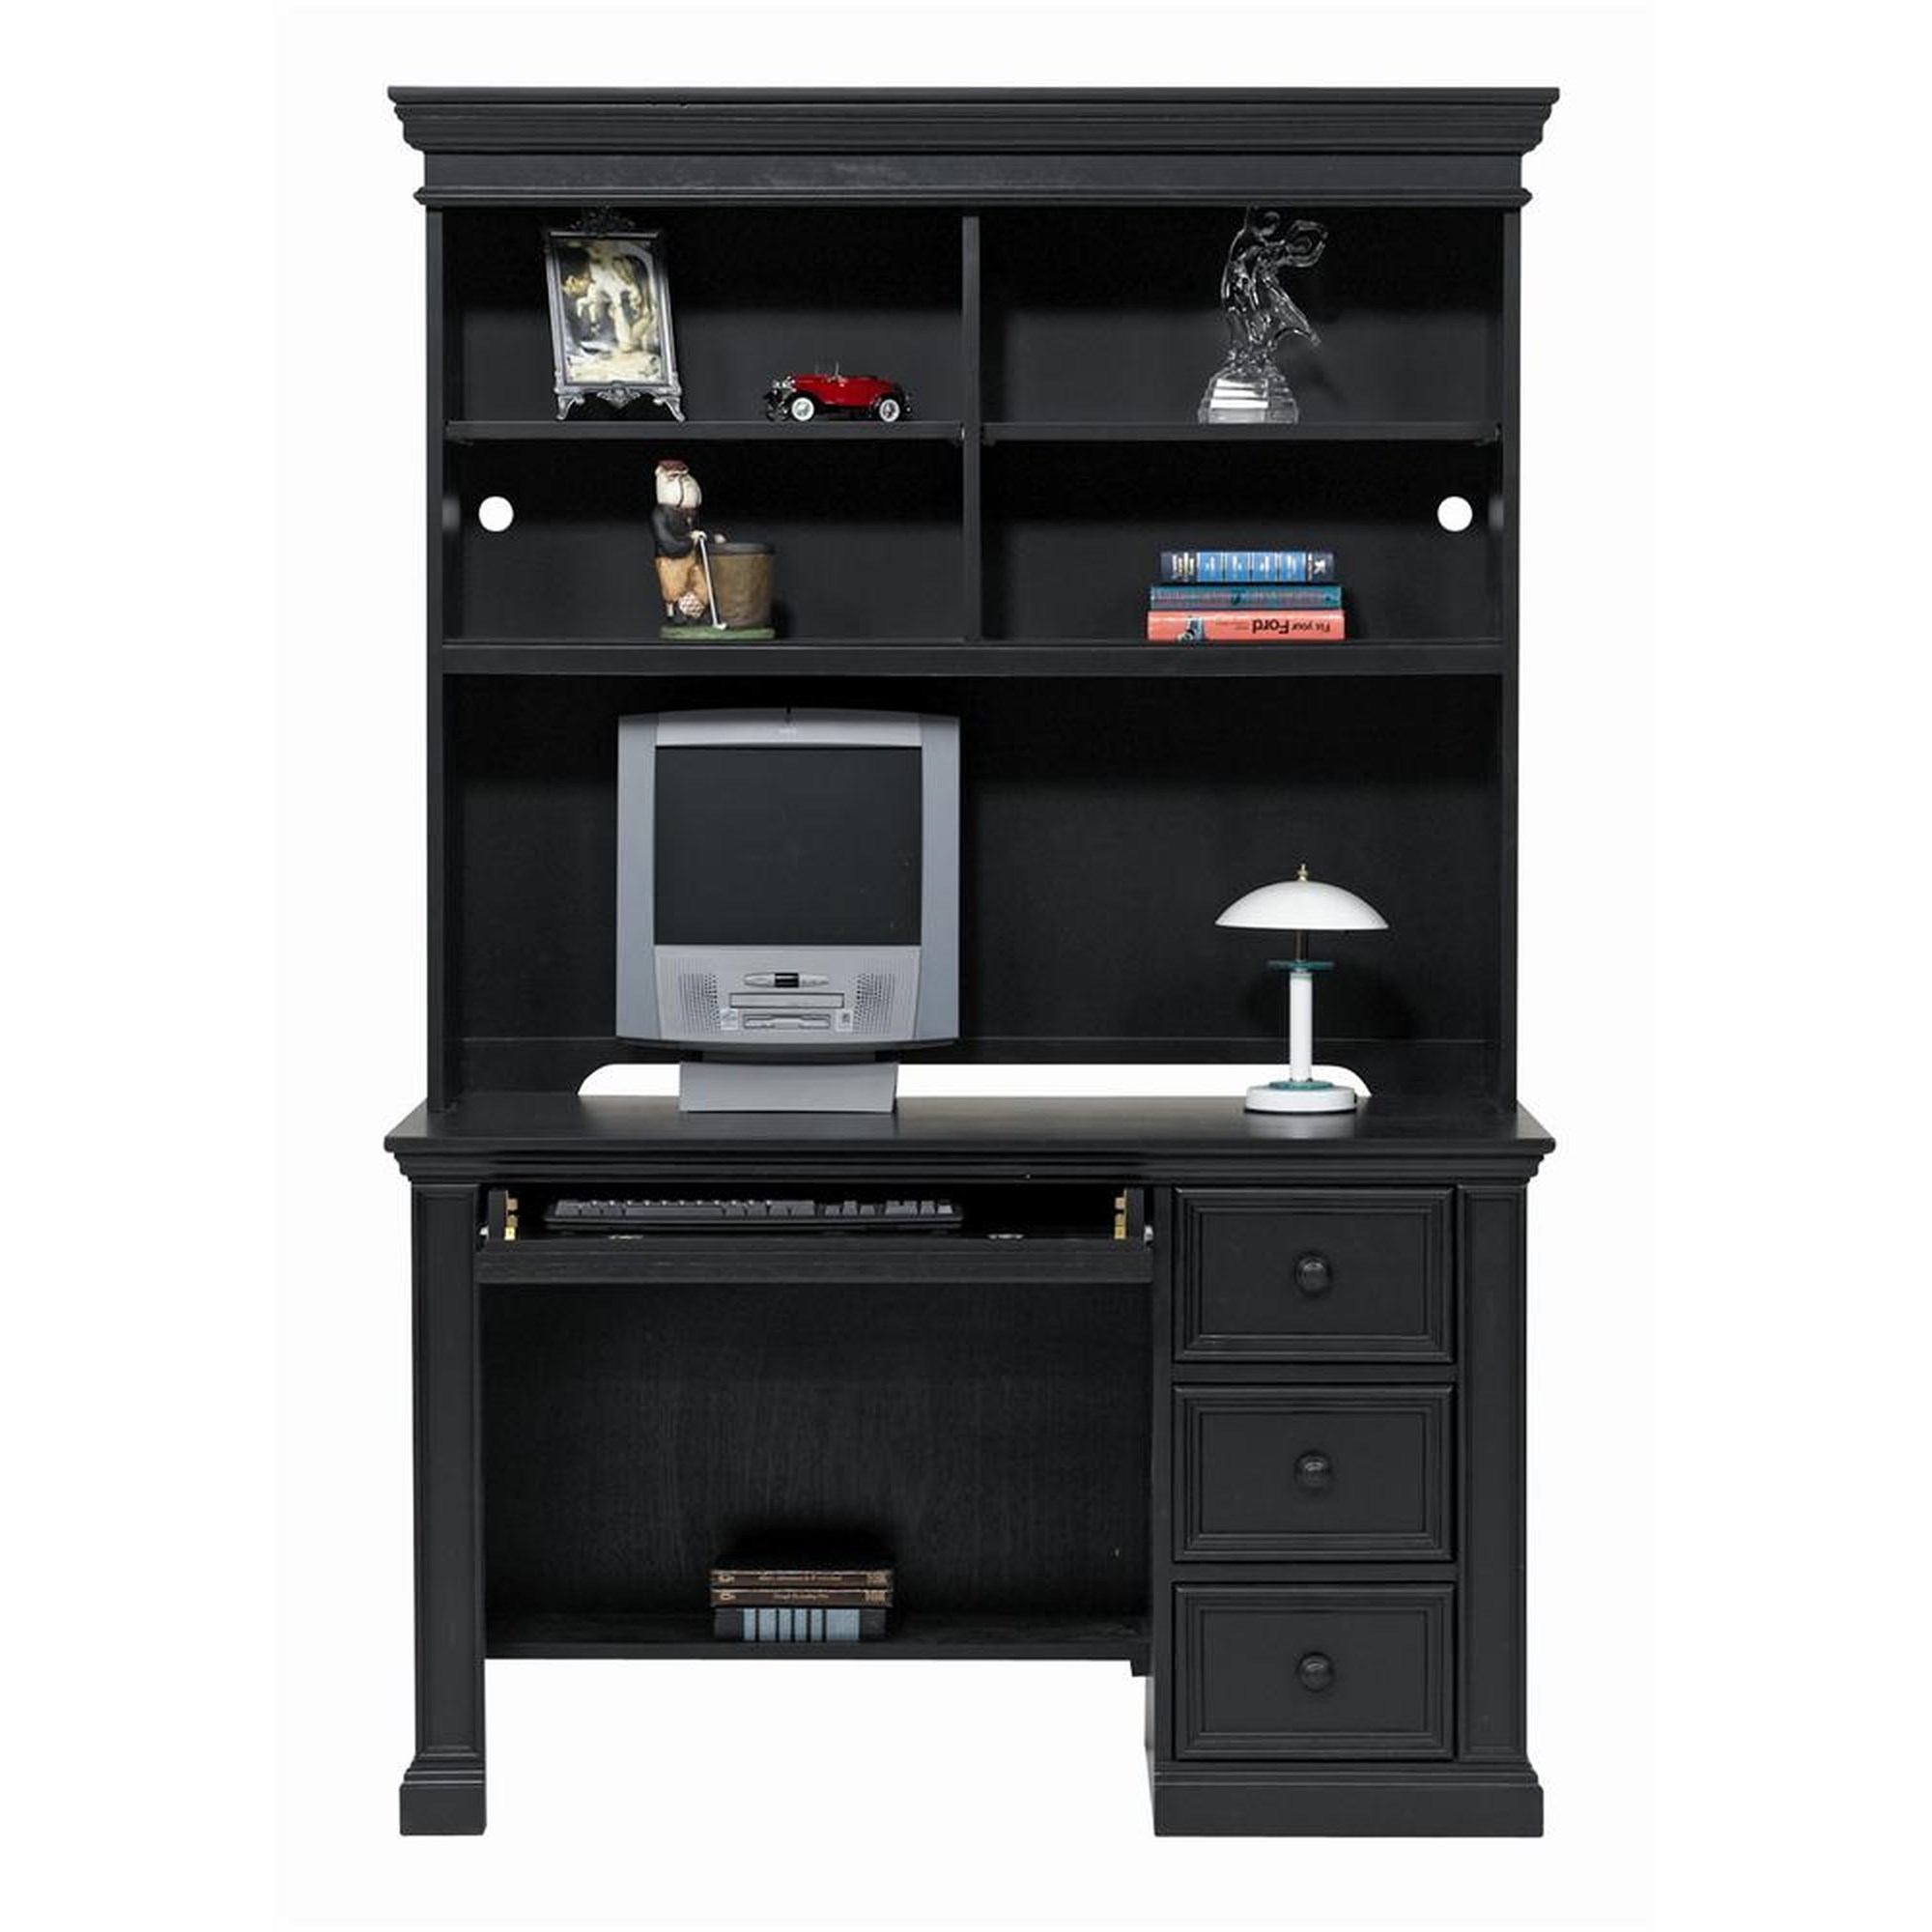 https://imageresizer4.furnituredealer.net/img/remote/images.furnituredealer.net/img/products/winners_only/color/cape%20cod%20b_be150-b2.jpg?width=2000&height=2000&scale=both